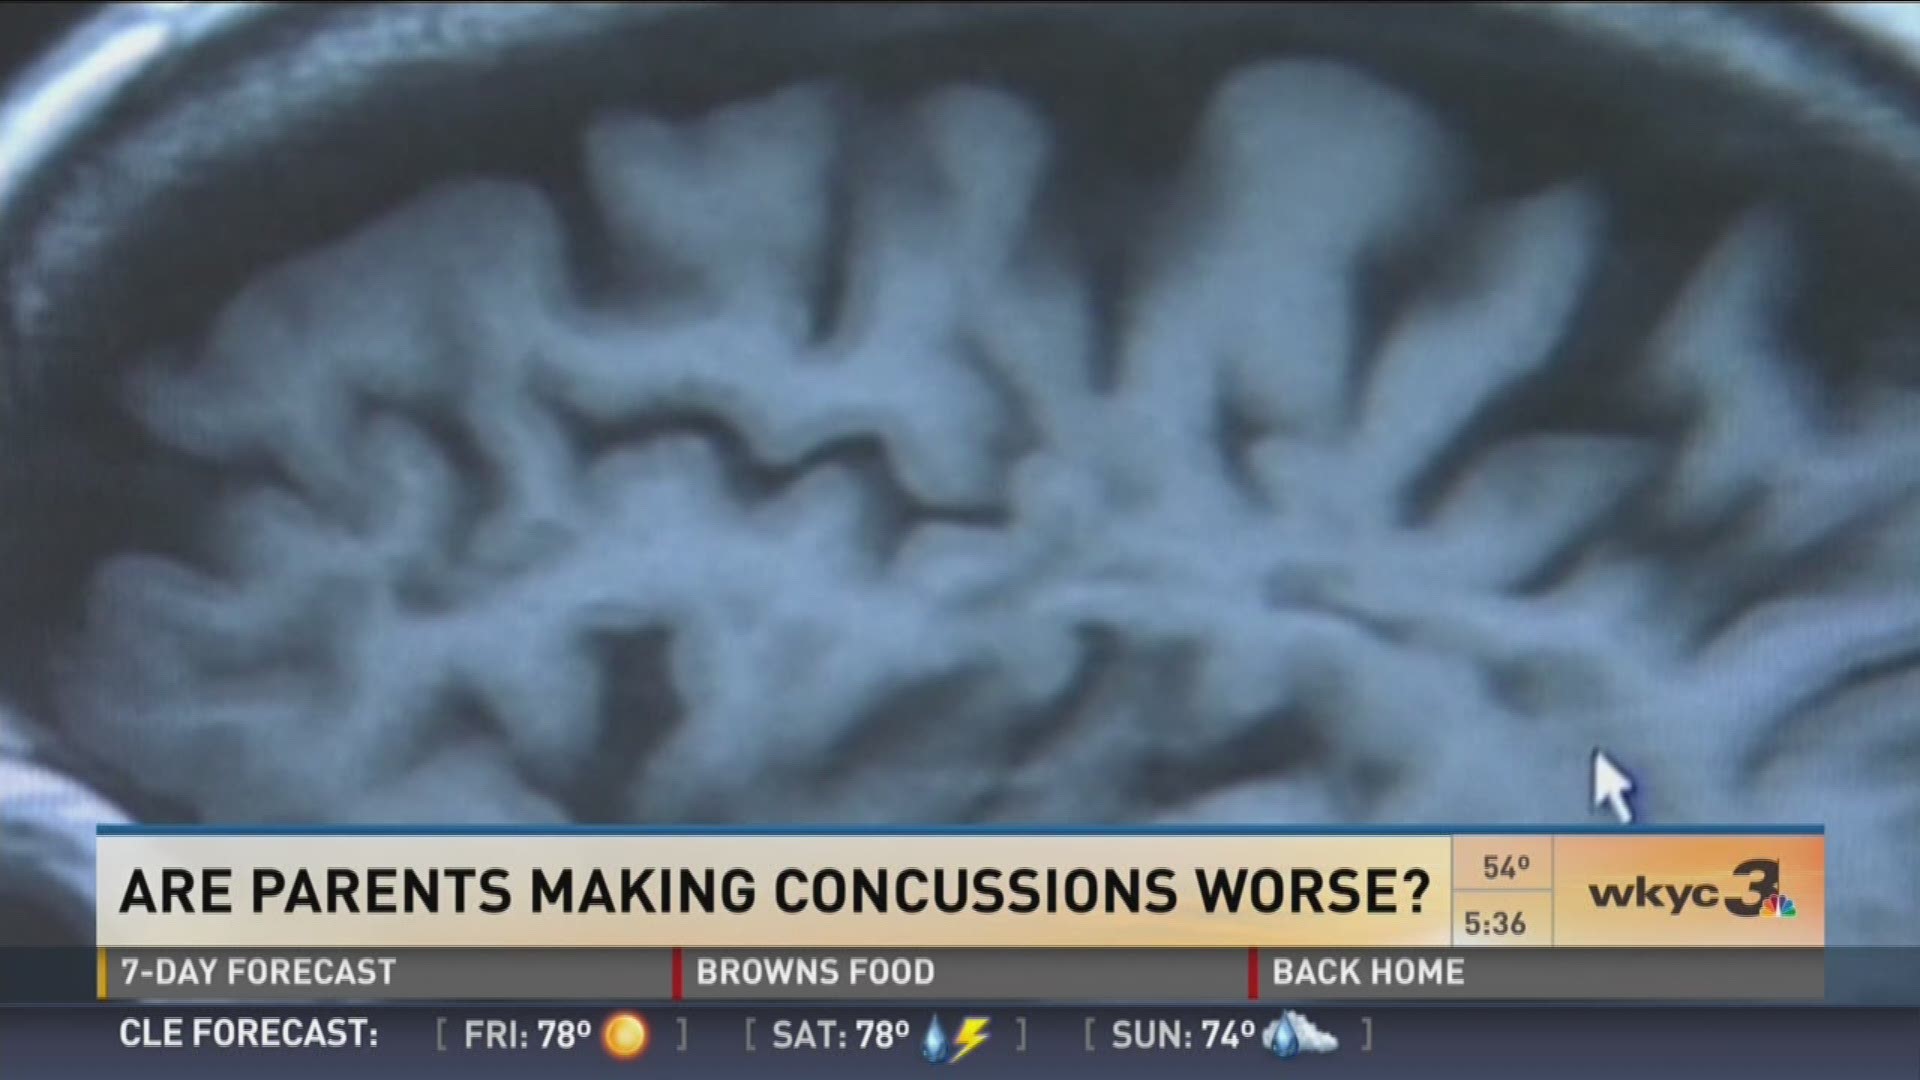 Are parents making concussions worse?: Will Ujek